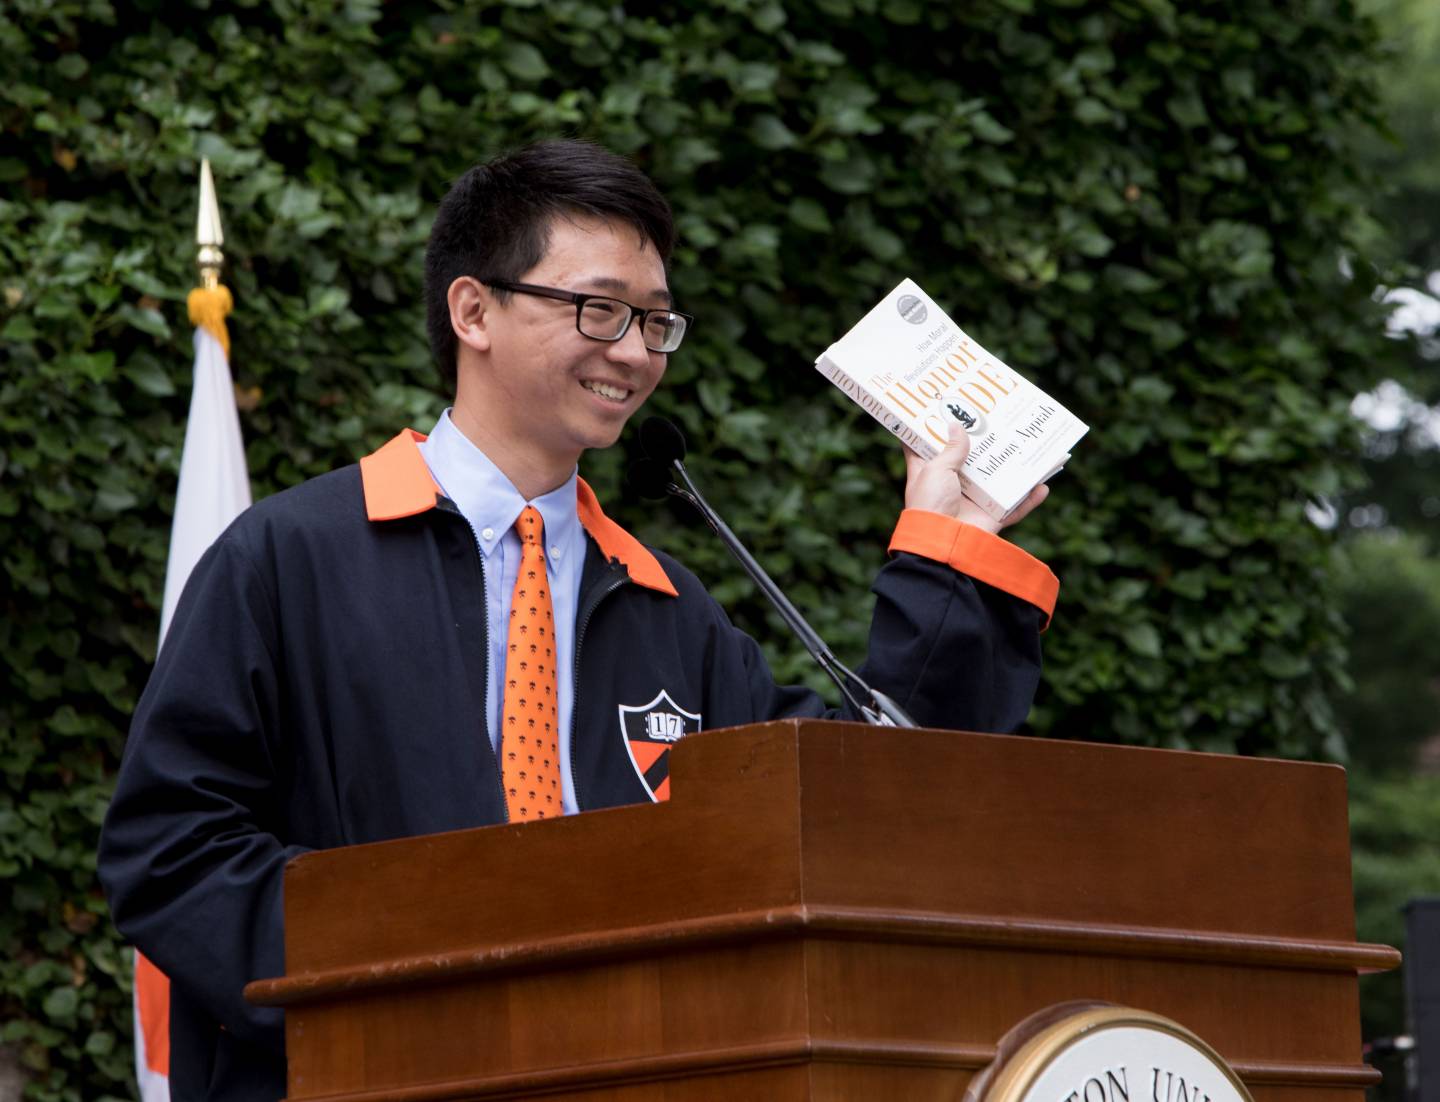 Class president at podium holding book during Class Day 2017 ceremony